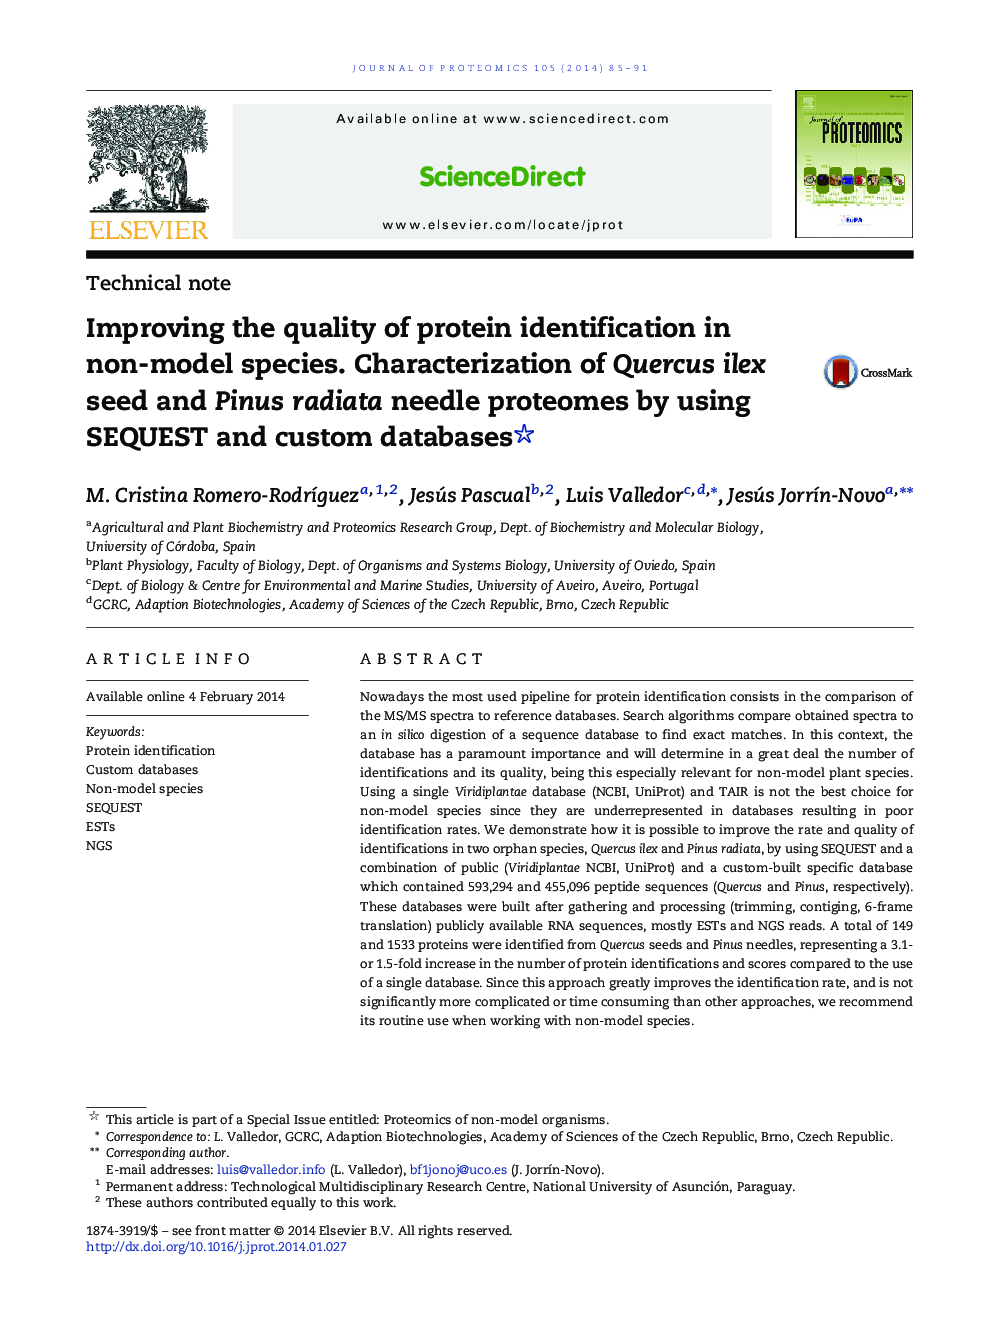 Improving the quality of protein identification in non-model species. Characterization of Quercus ilex seed and Pinus radiata needle proteomes by using SEQUEST and custom databases 